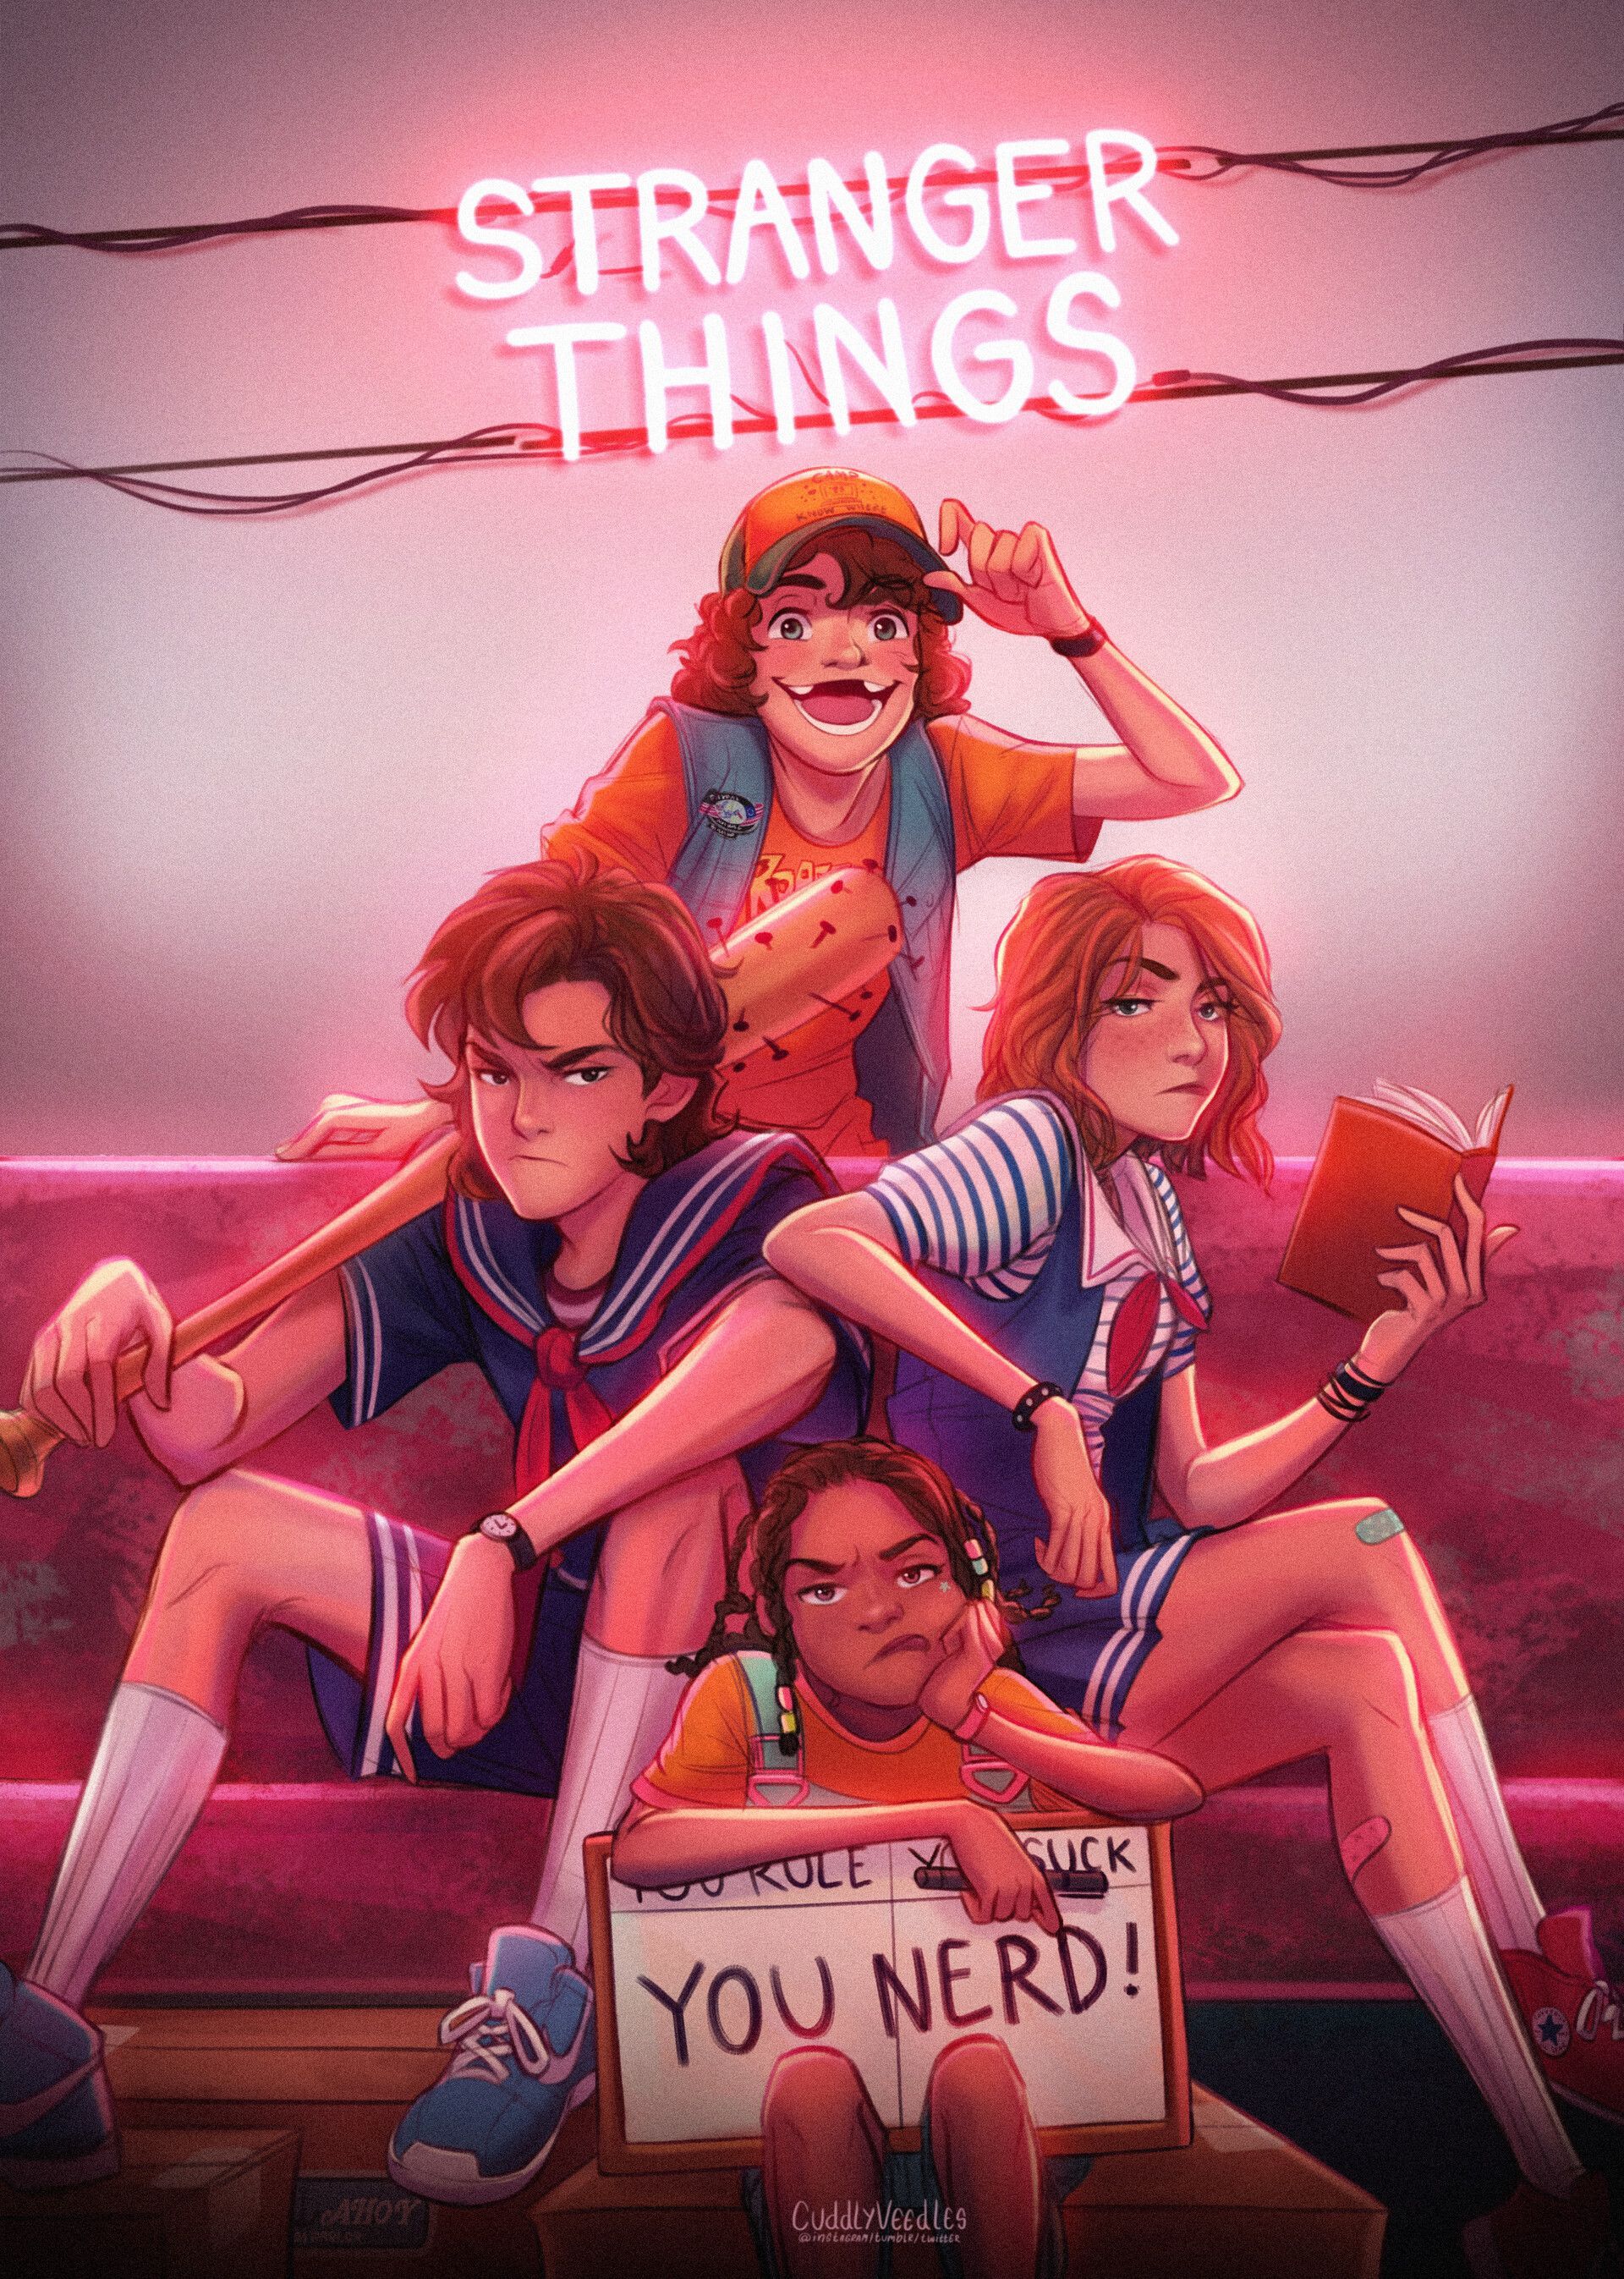 Stranger Things 3, Scoops Troop by Cuddly Veedles Turn around Look at what you see Not The. Wallpaper de filmes, Pôsteres de filmes, Stranger things atores